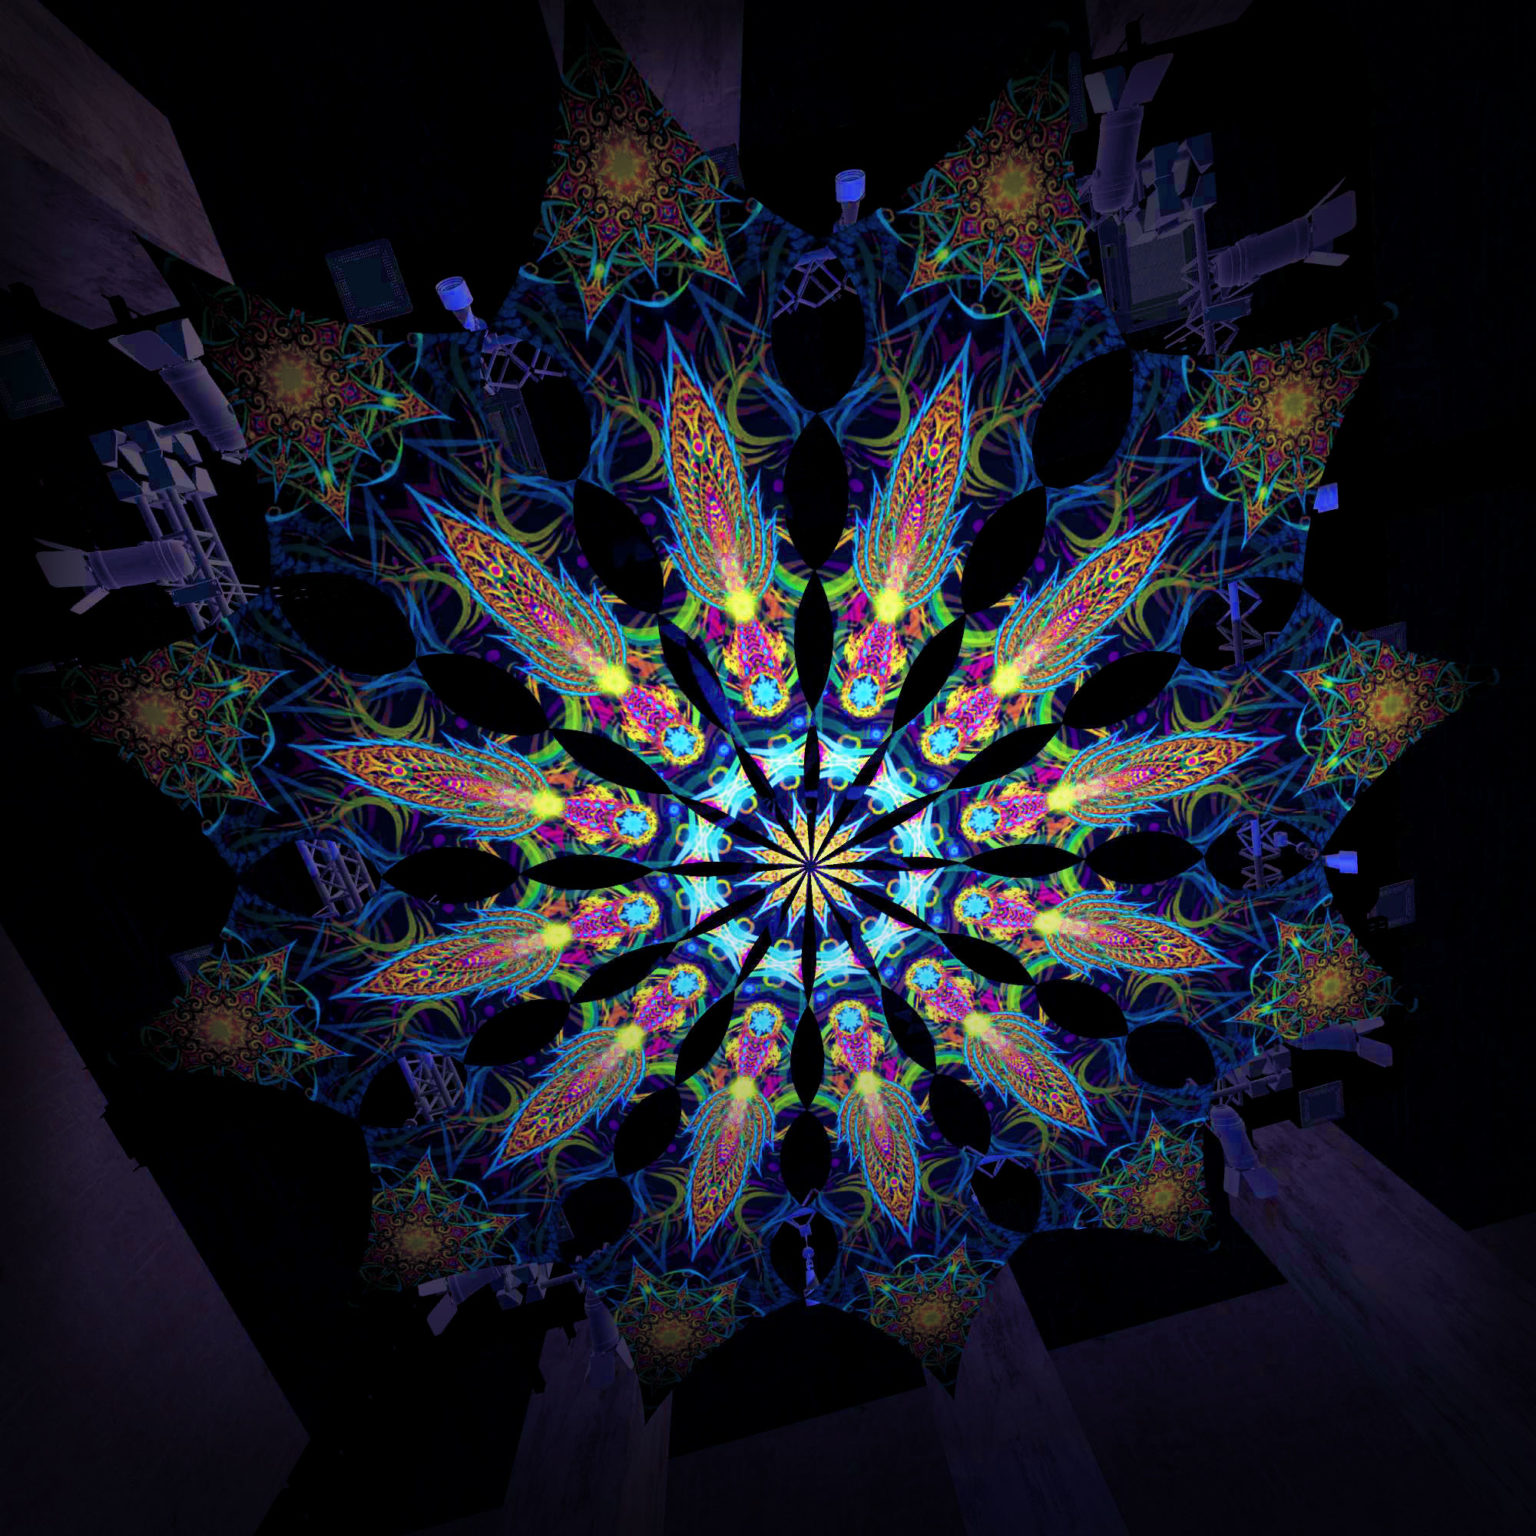 Reincarnation 2 - Star -Psychedelic UV Canopy - 12 petals set - Large Size 11m diameter -3D-Preview in a club